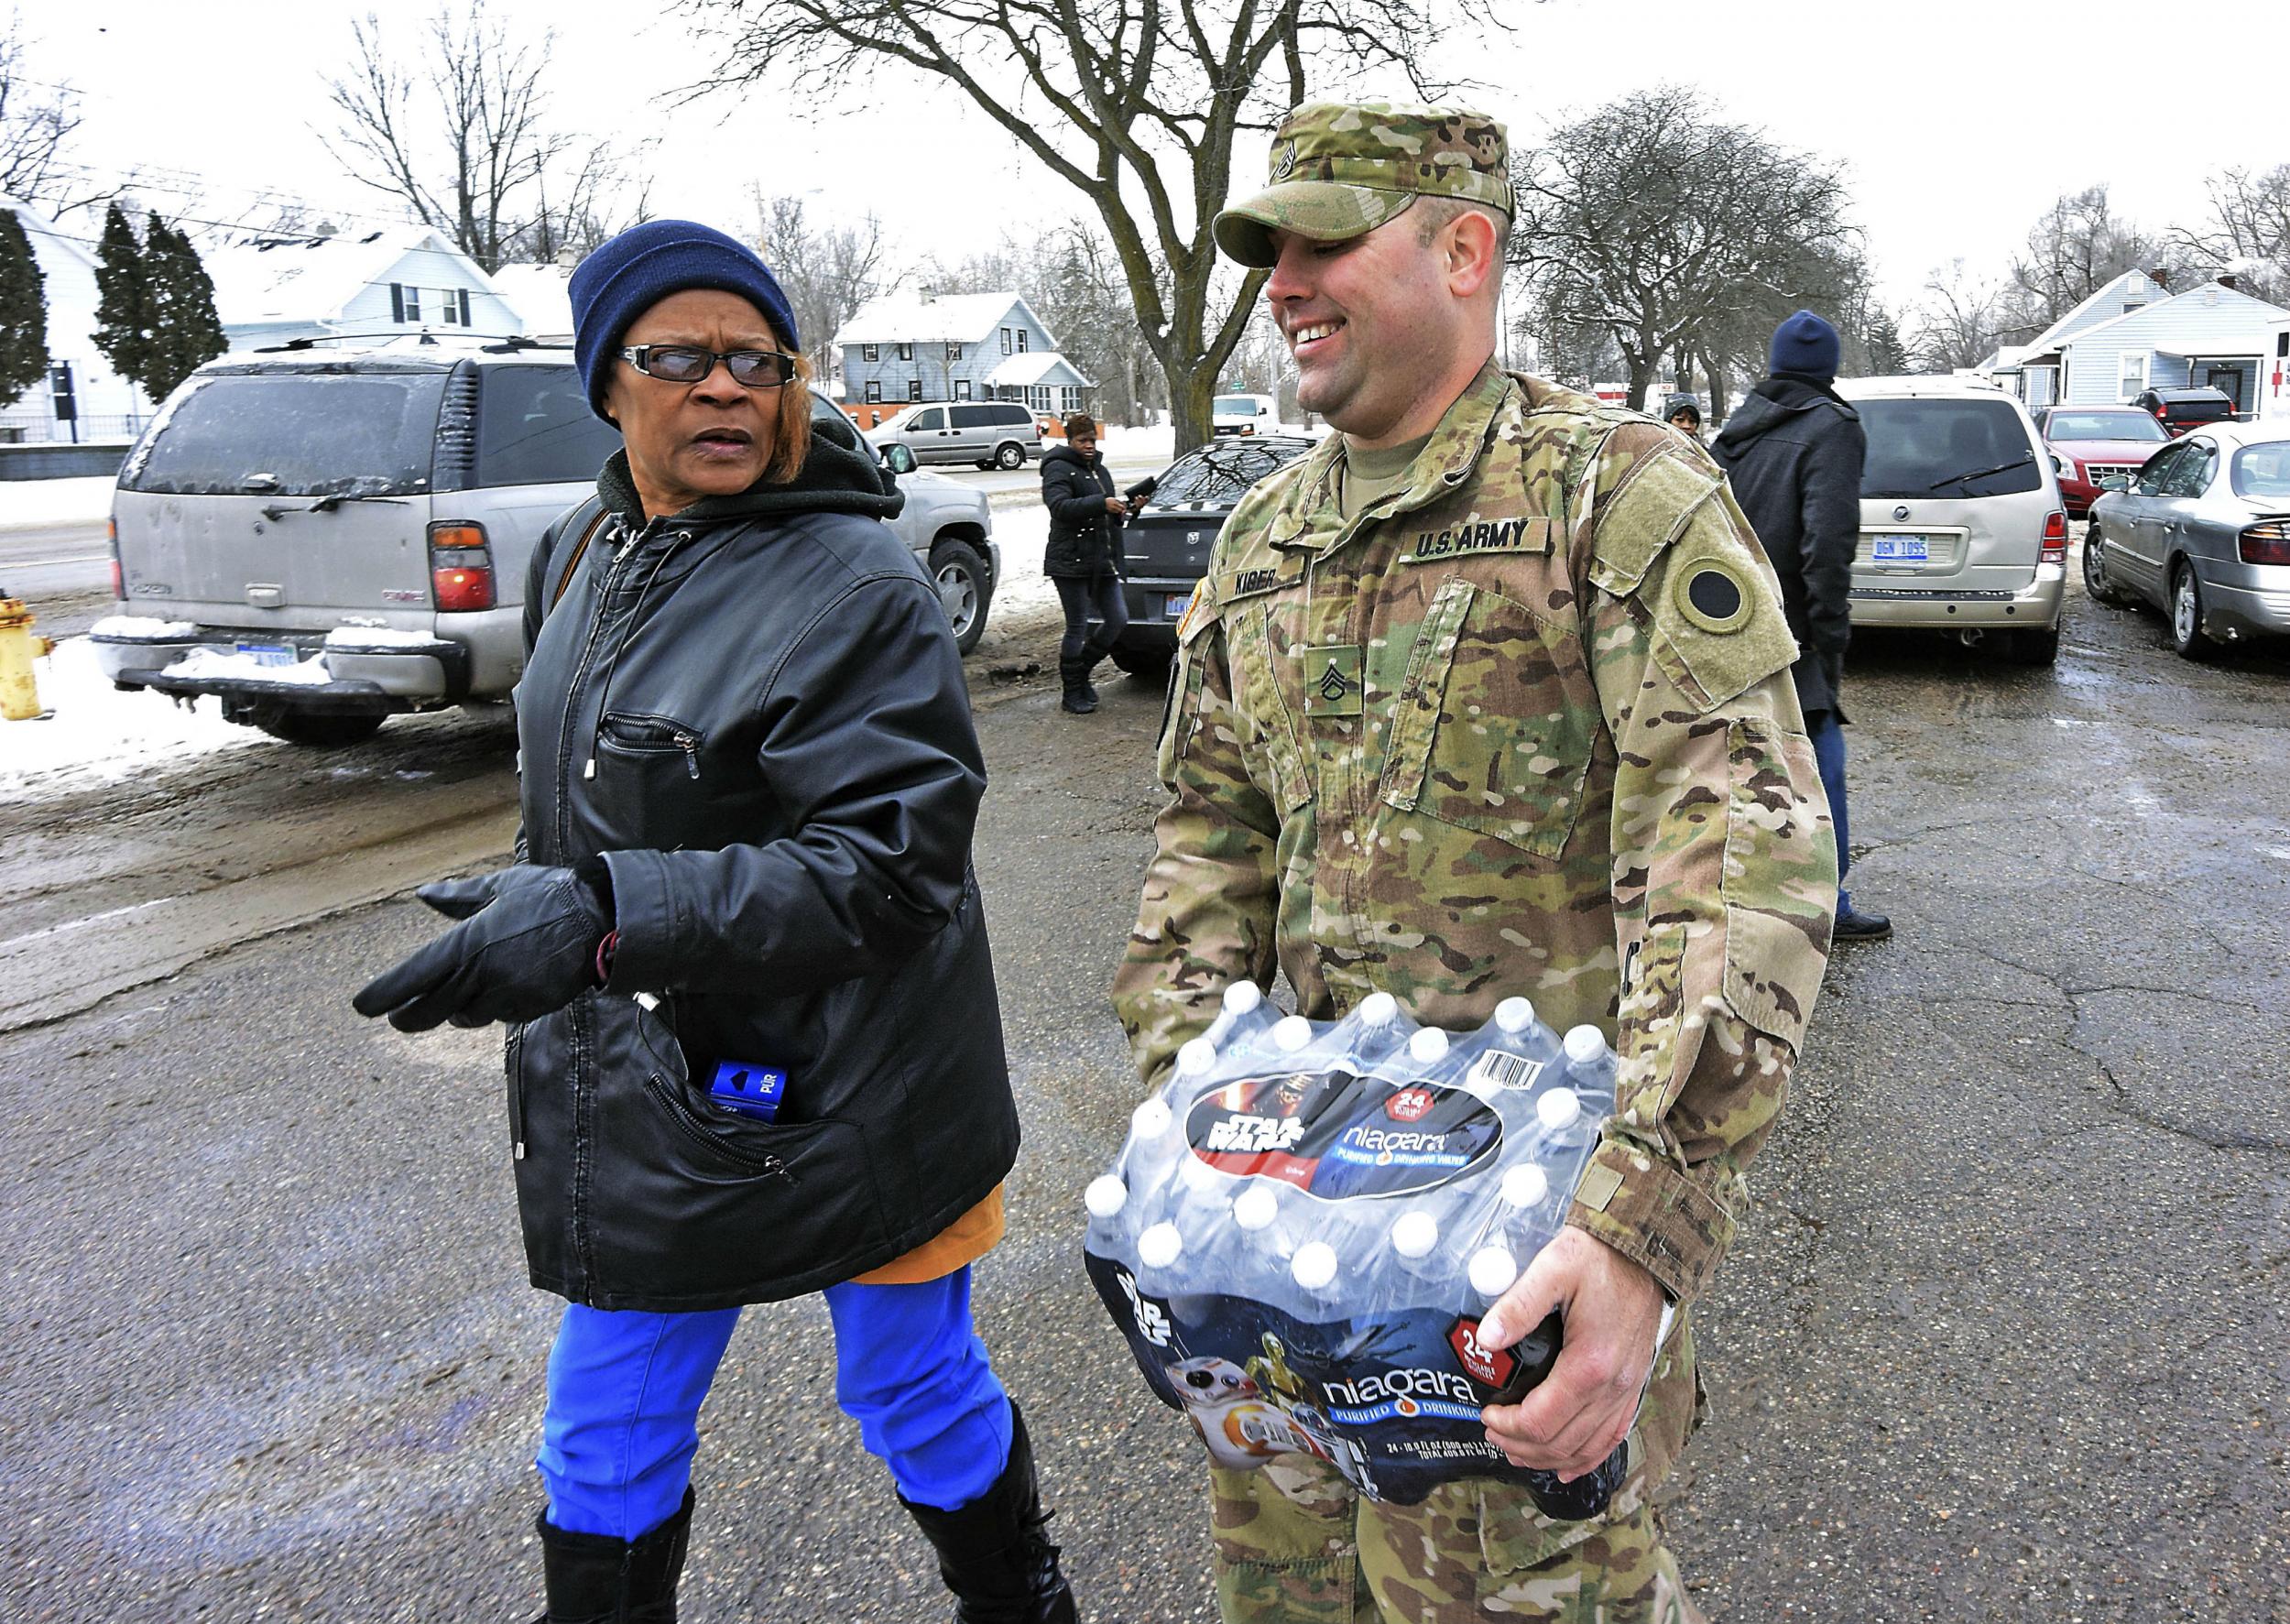 A state of emergency has been declared in Flint